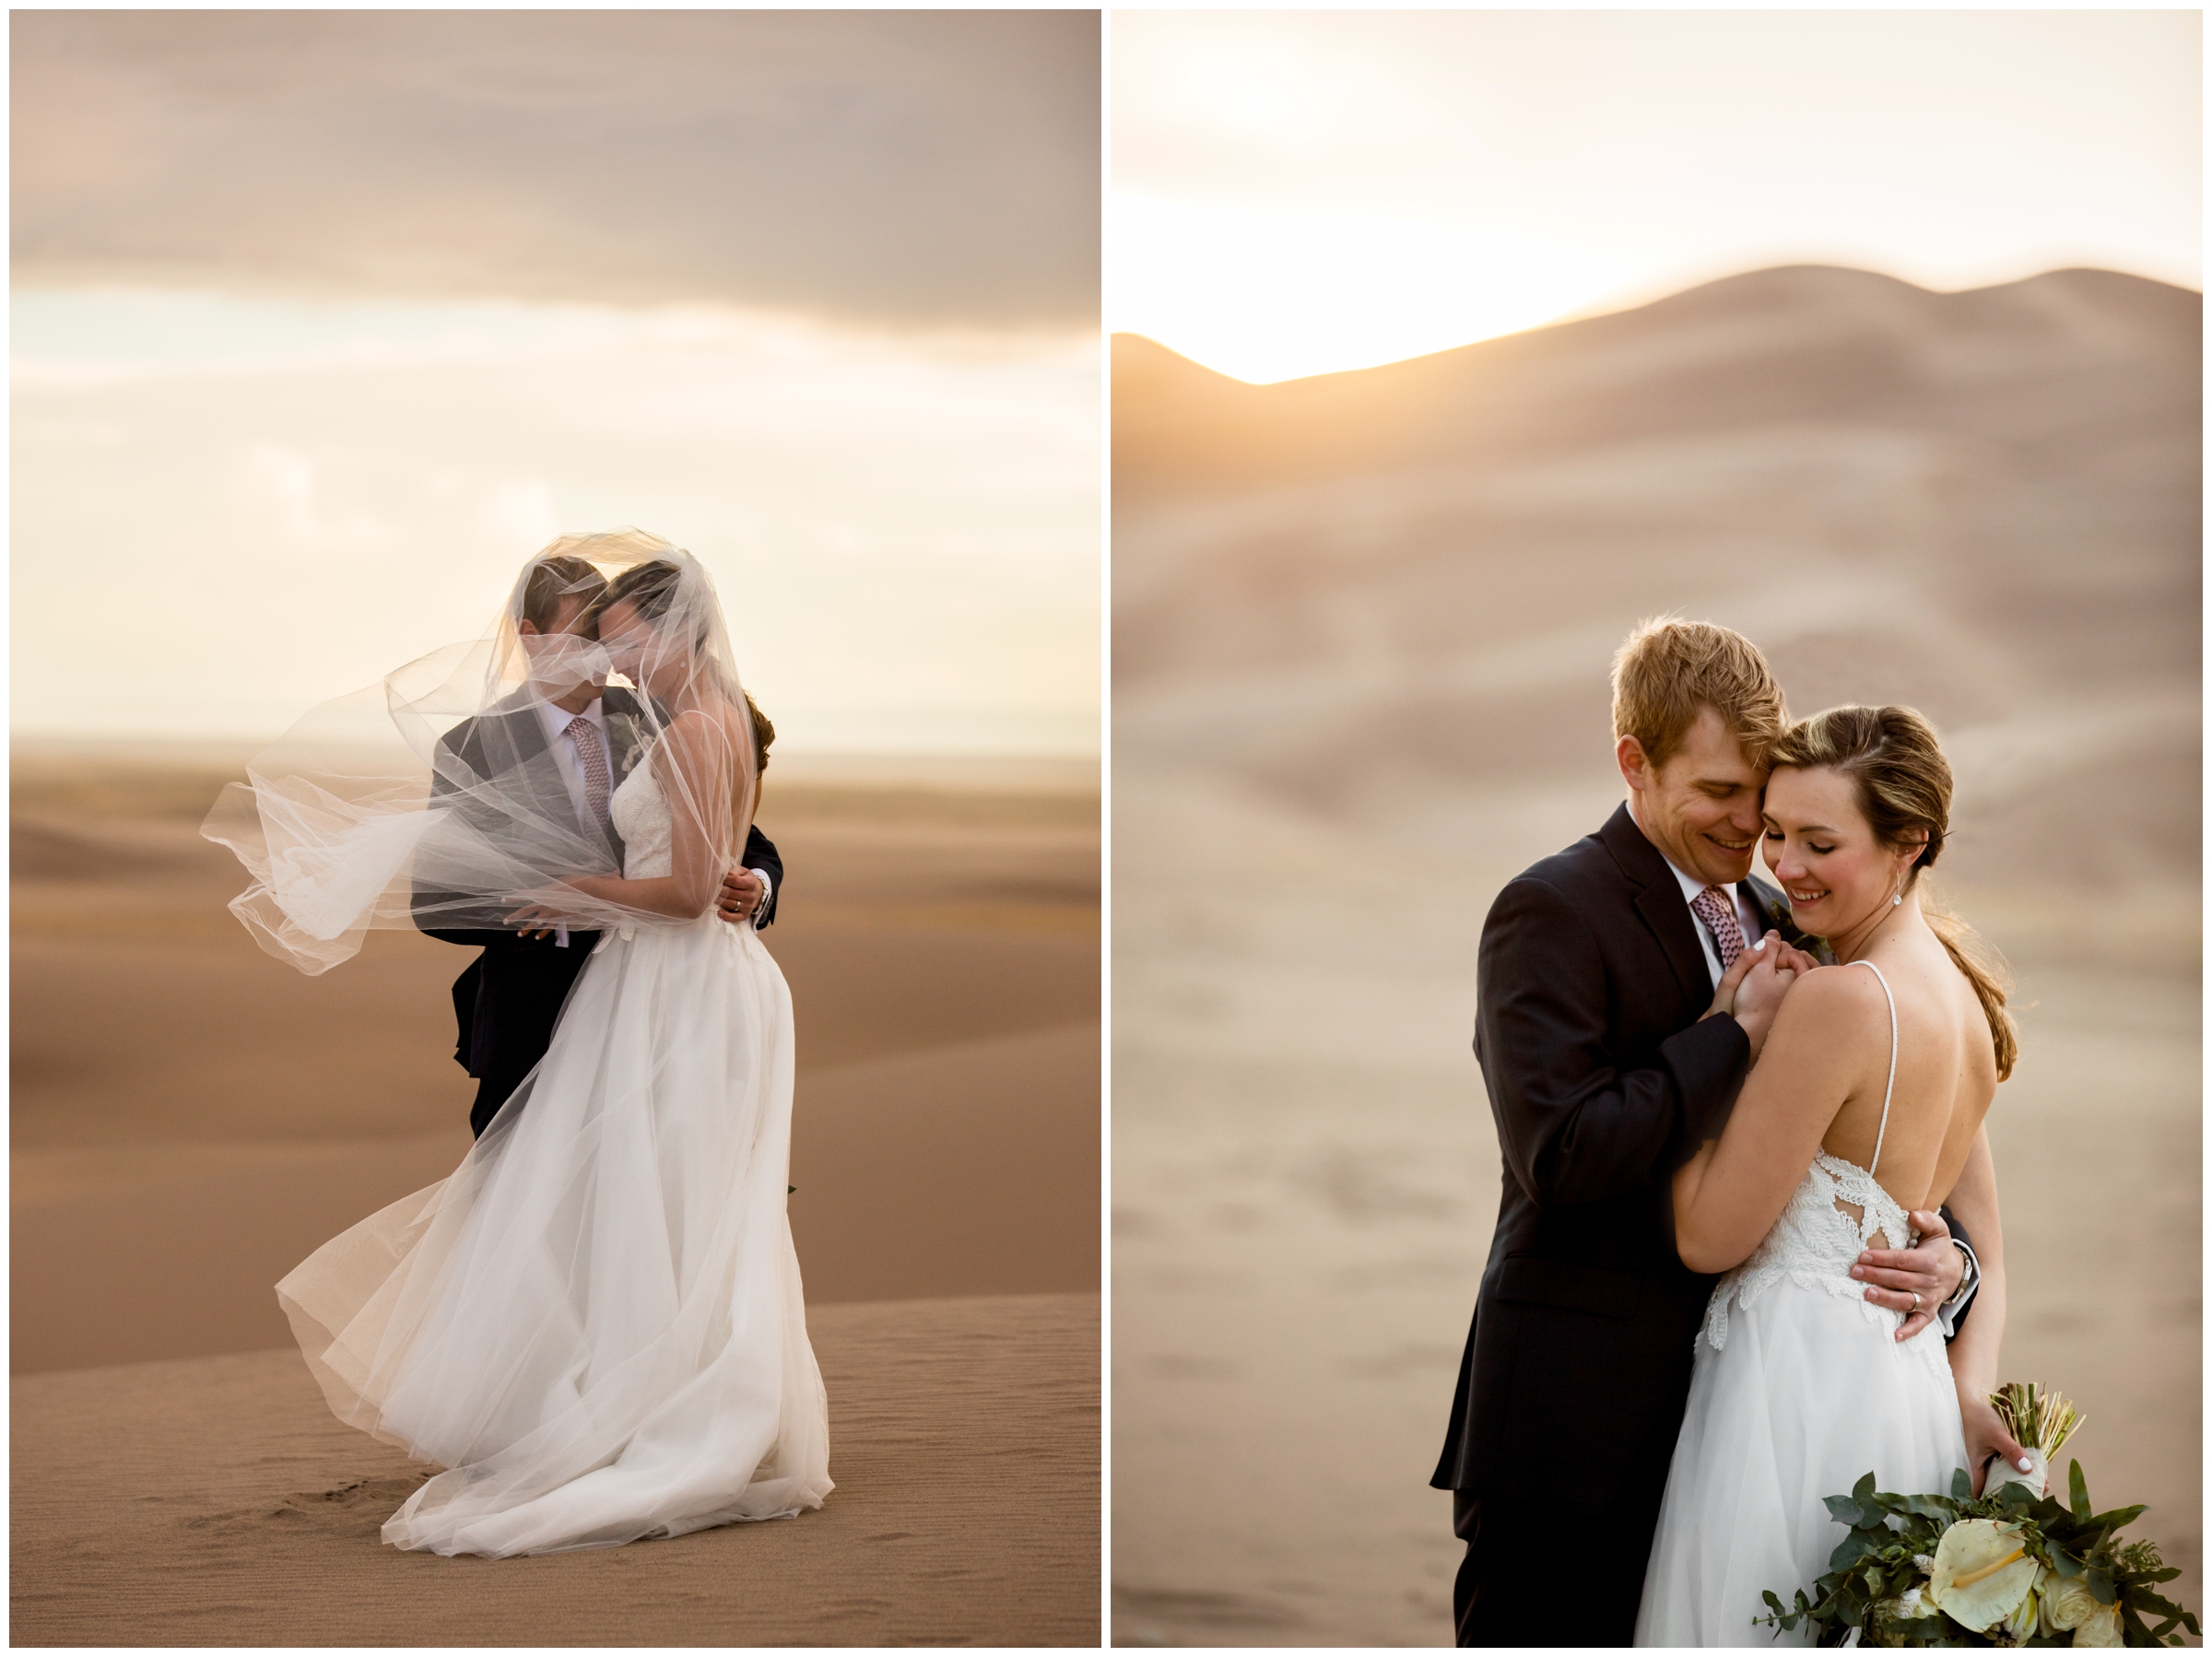 veil flying in wind during Southern Colorado elopement photography session 